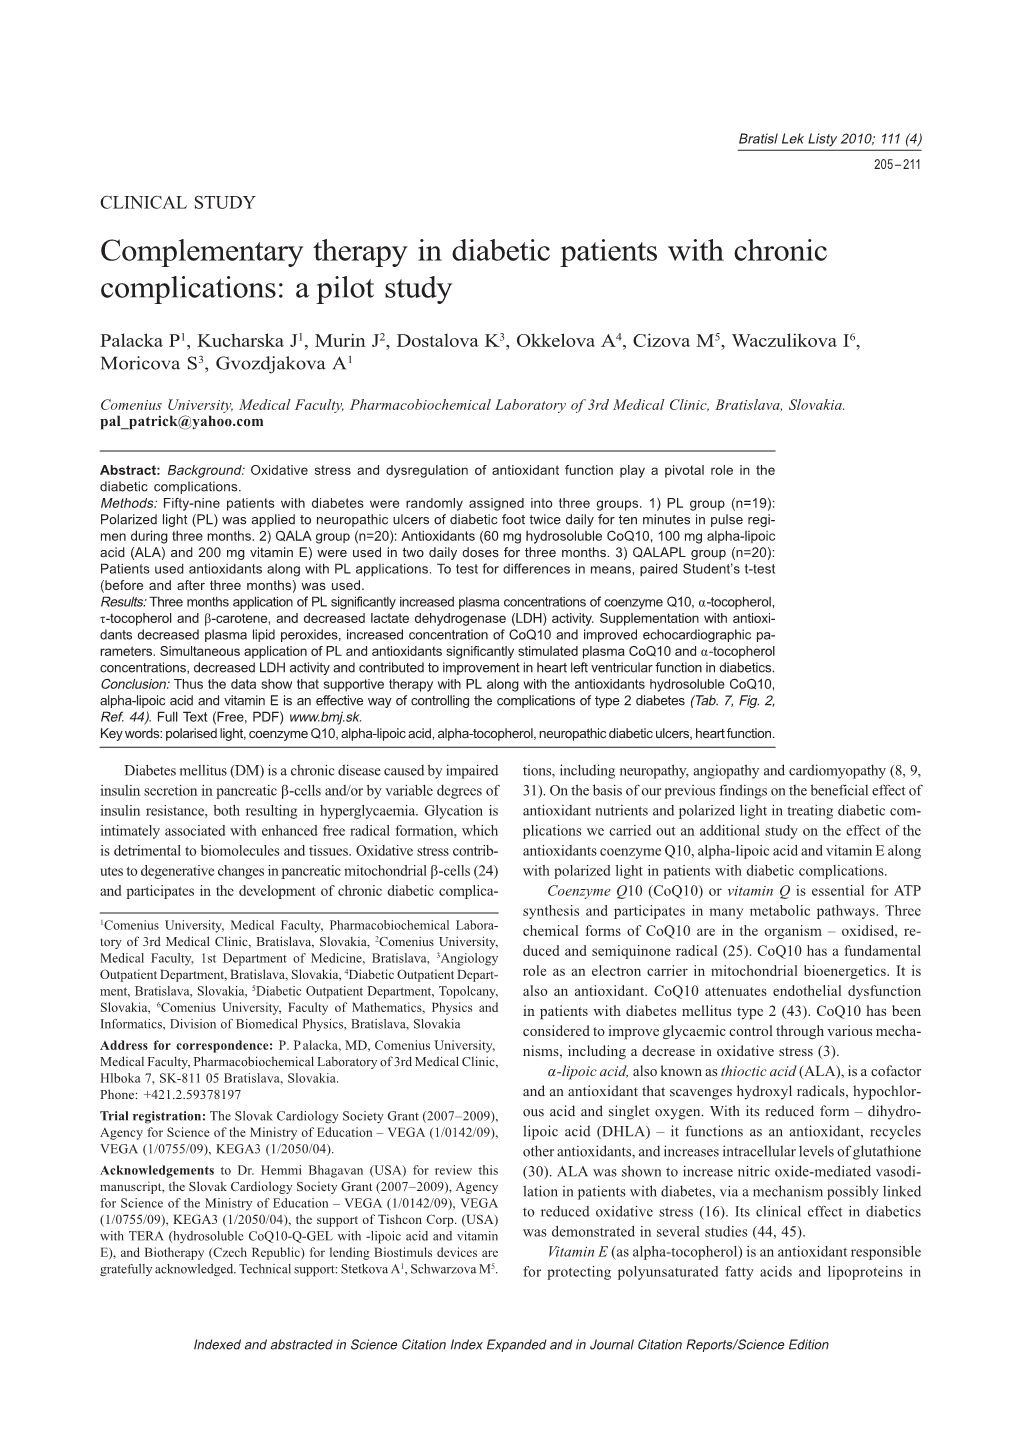 Complementary Therapy in Diabetic Patients with Chronic Complications: a Pilot Study